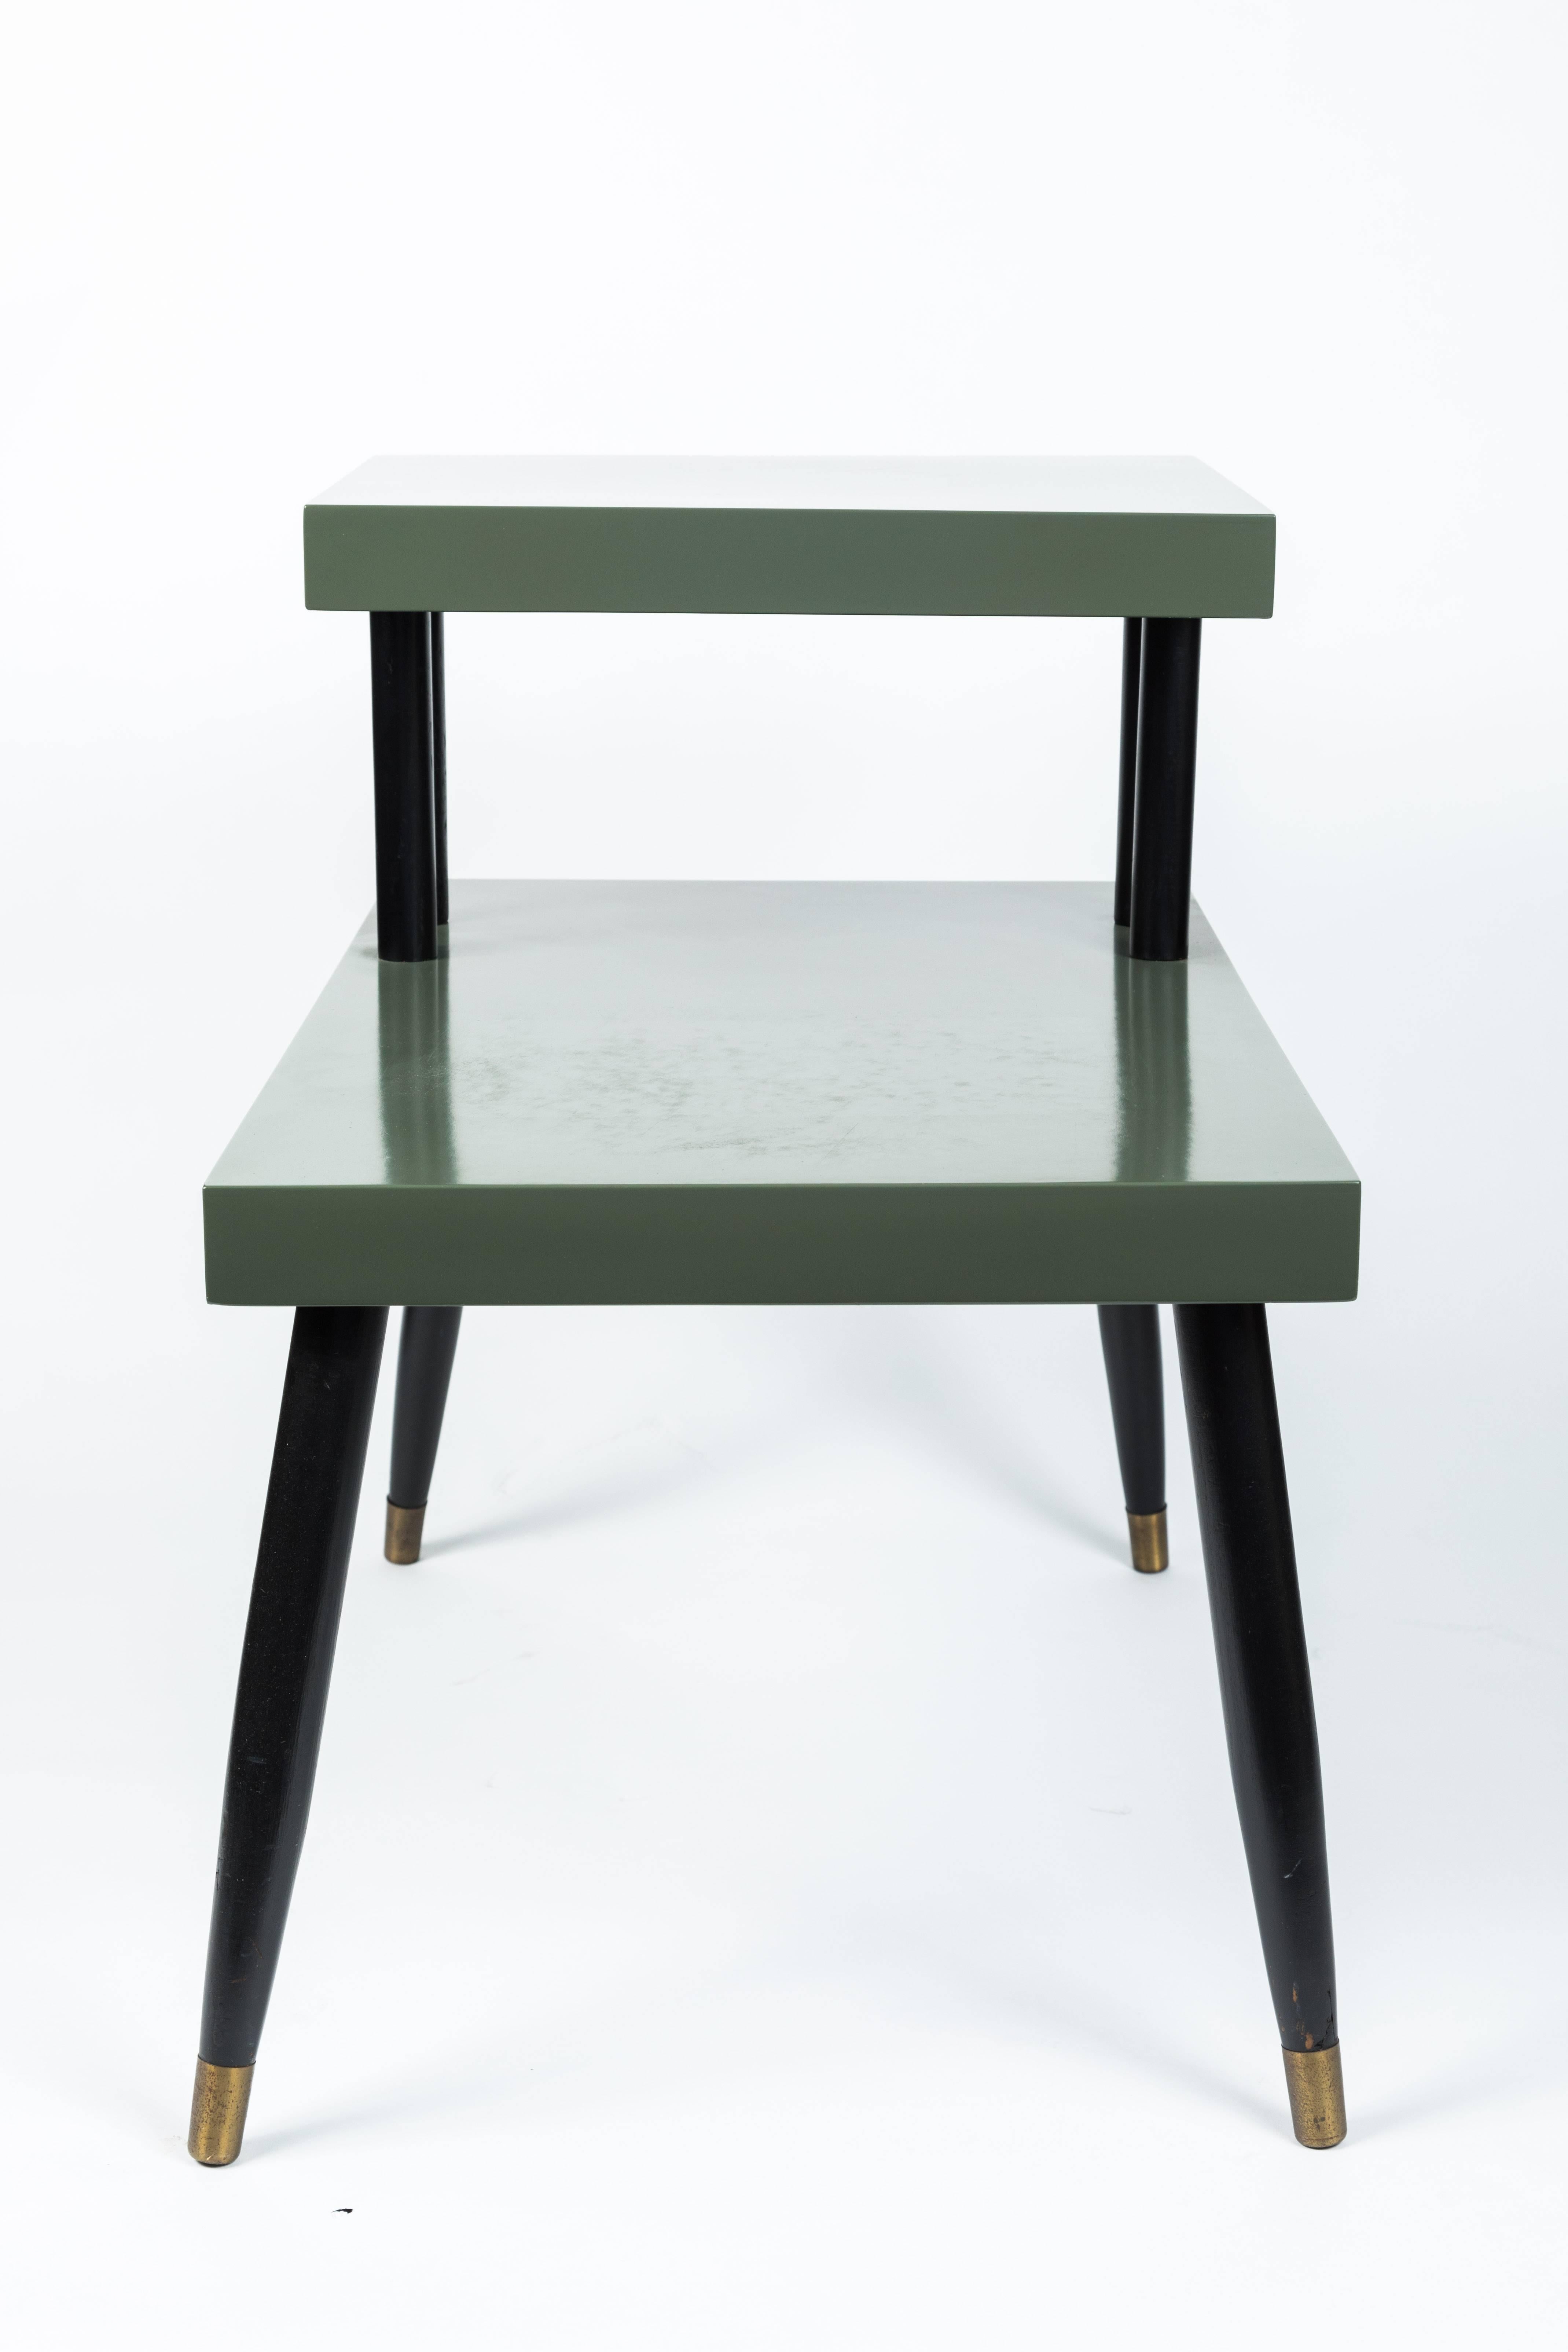 Mid-Century Modern two-tiered side table
American, 1950s
Sea foam green lacquer finish, with black legs and accents, brass capped feet.
Recently refinished.
 